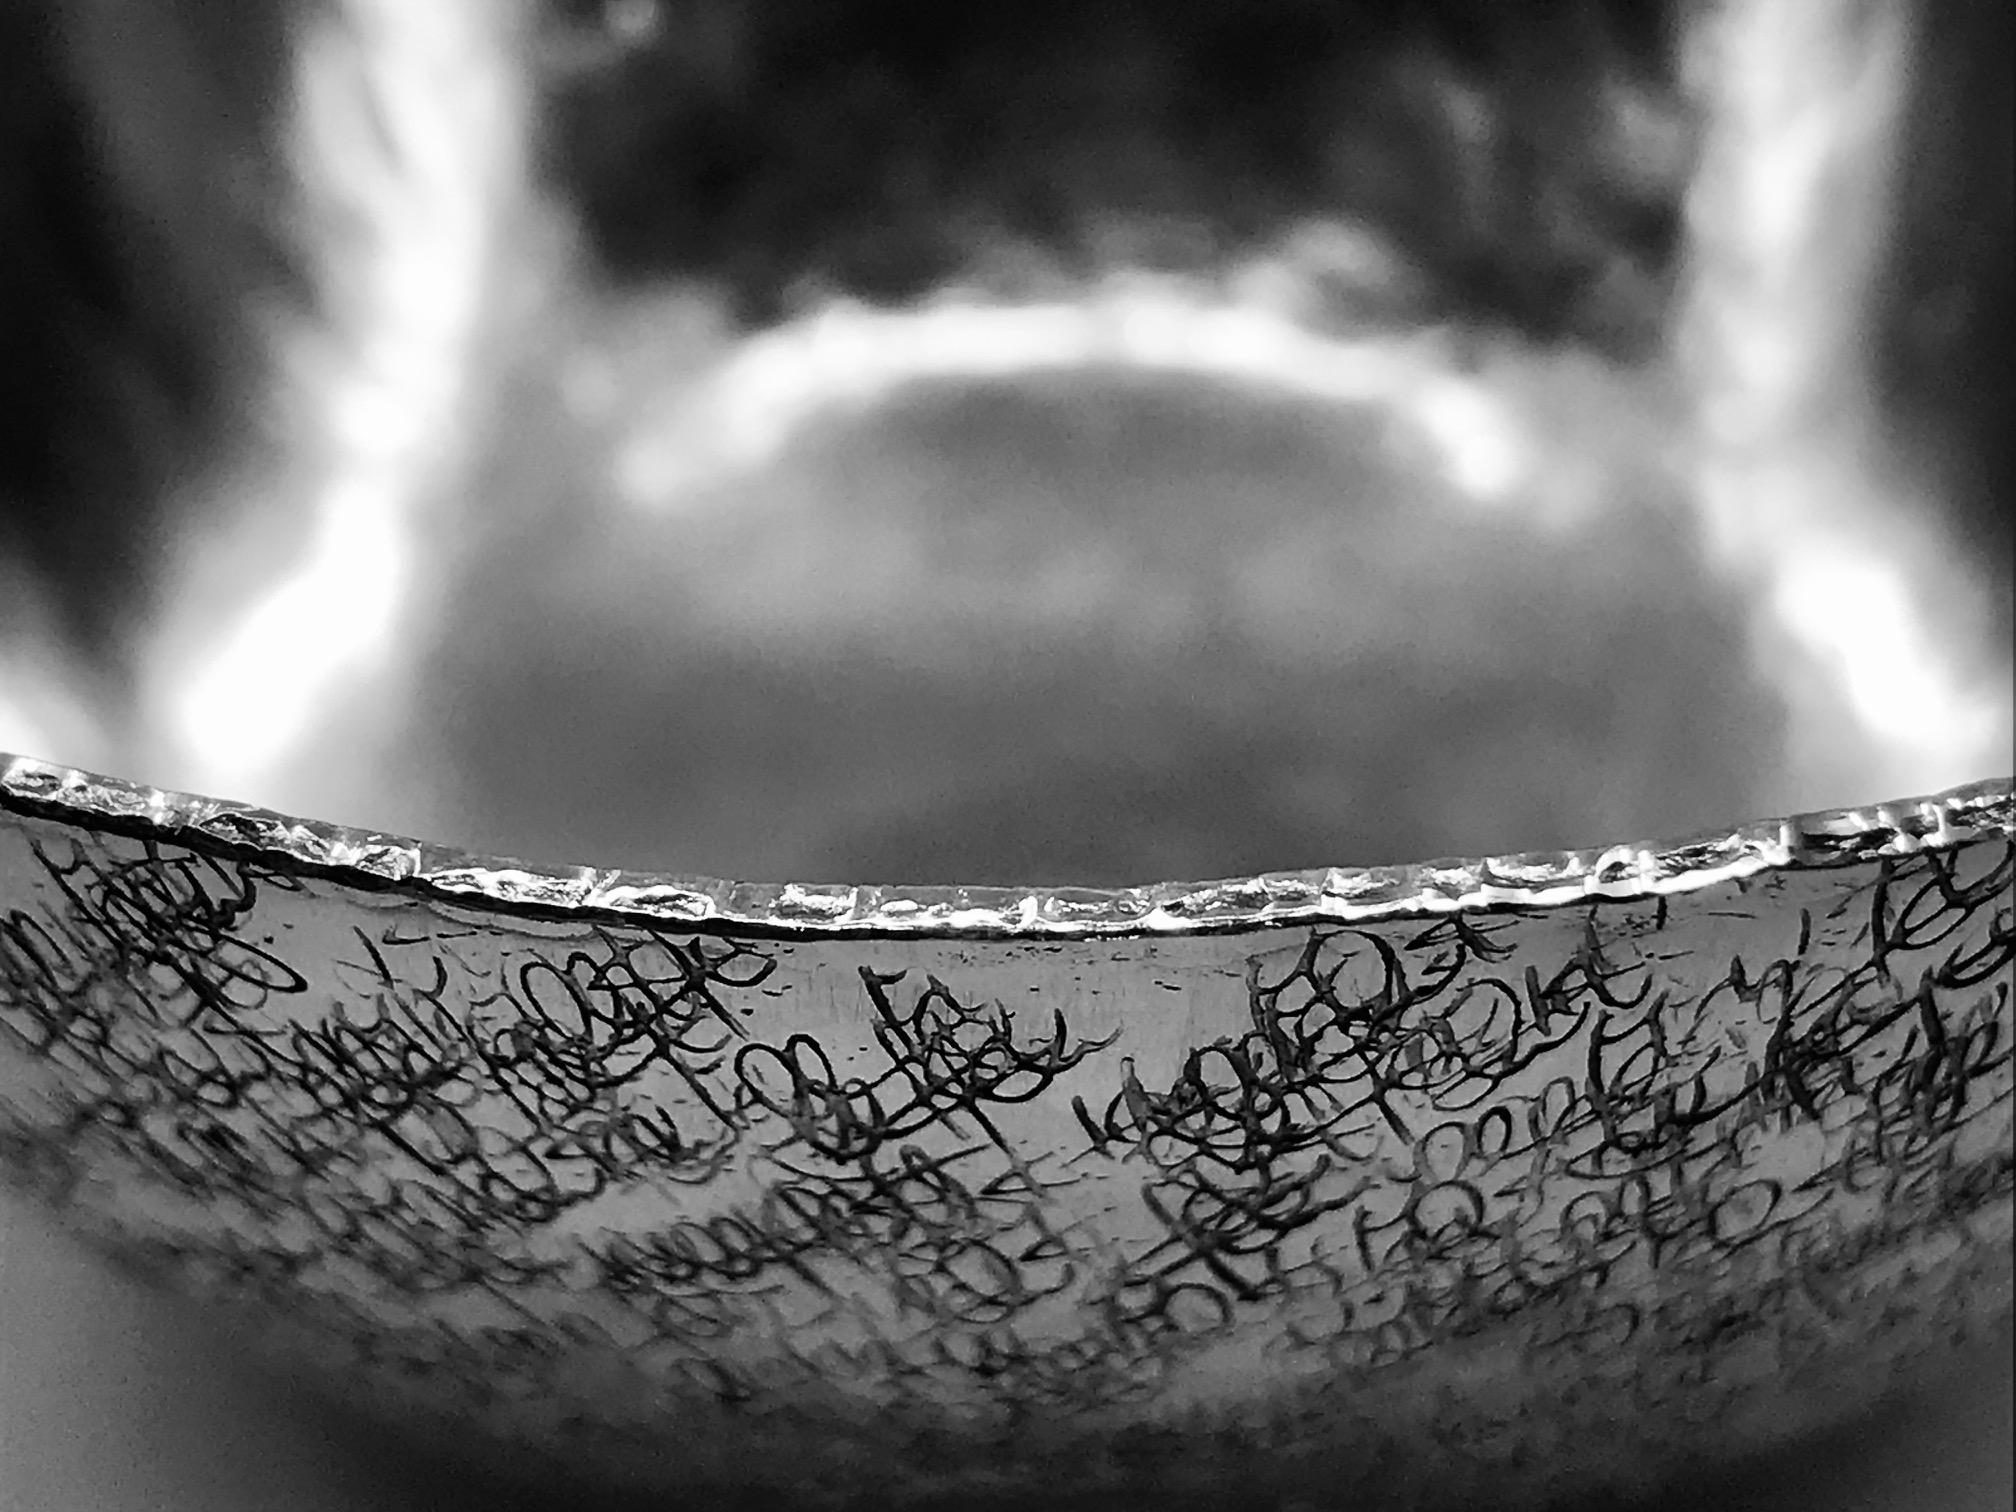 Unique Allan Scharff Fine silver small bowl made by hand in 2007, and called “Signature”.
The outside of the bowl is stamped all-over with Allan Scharff’s signature.
The interior of the bowl has a softly hammered surface and the edges are